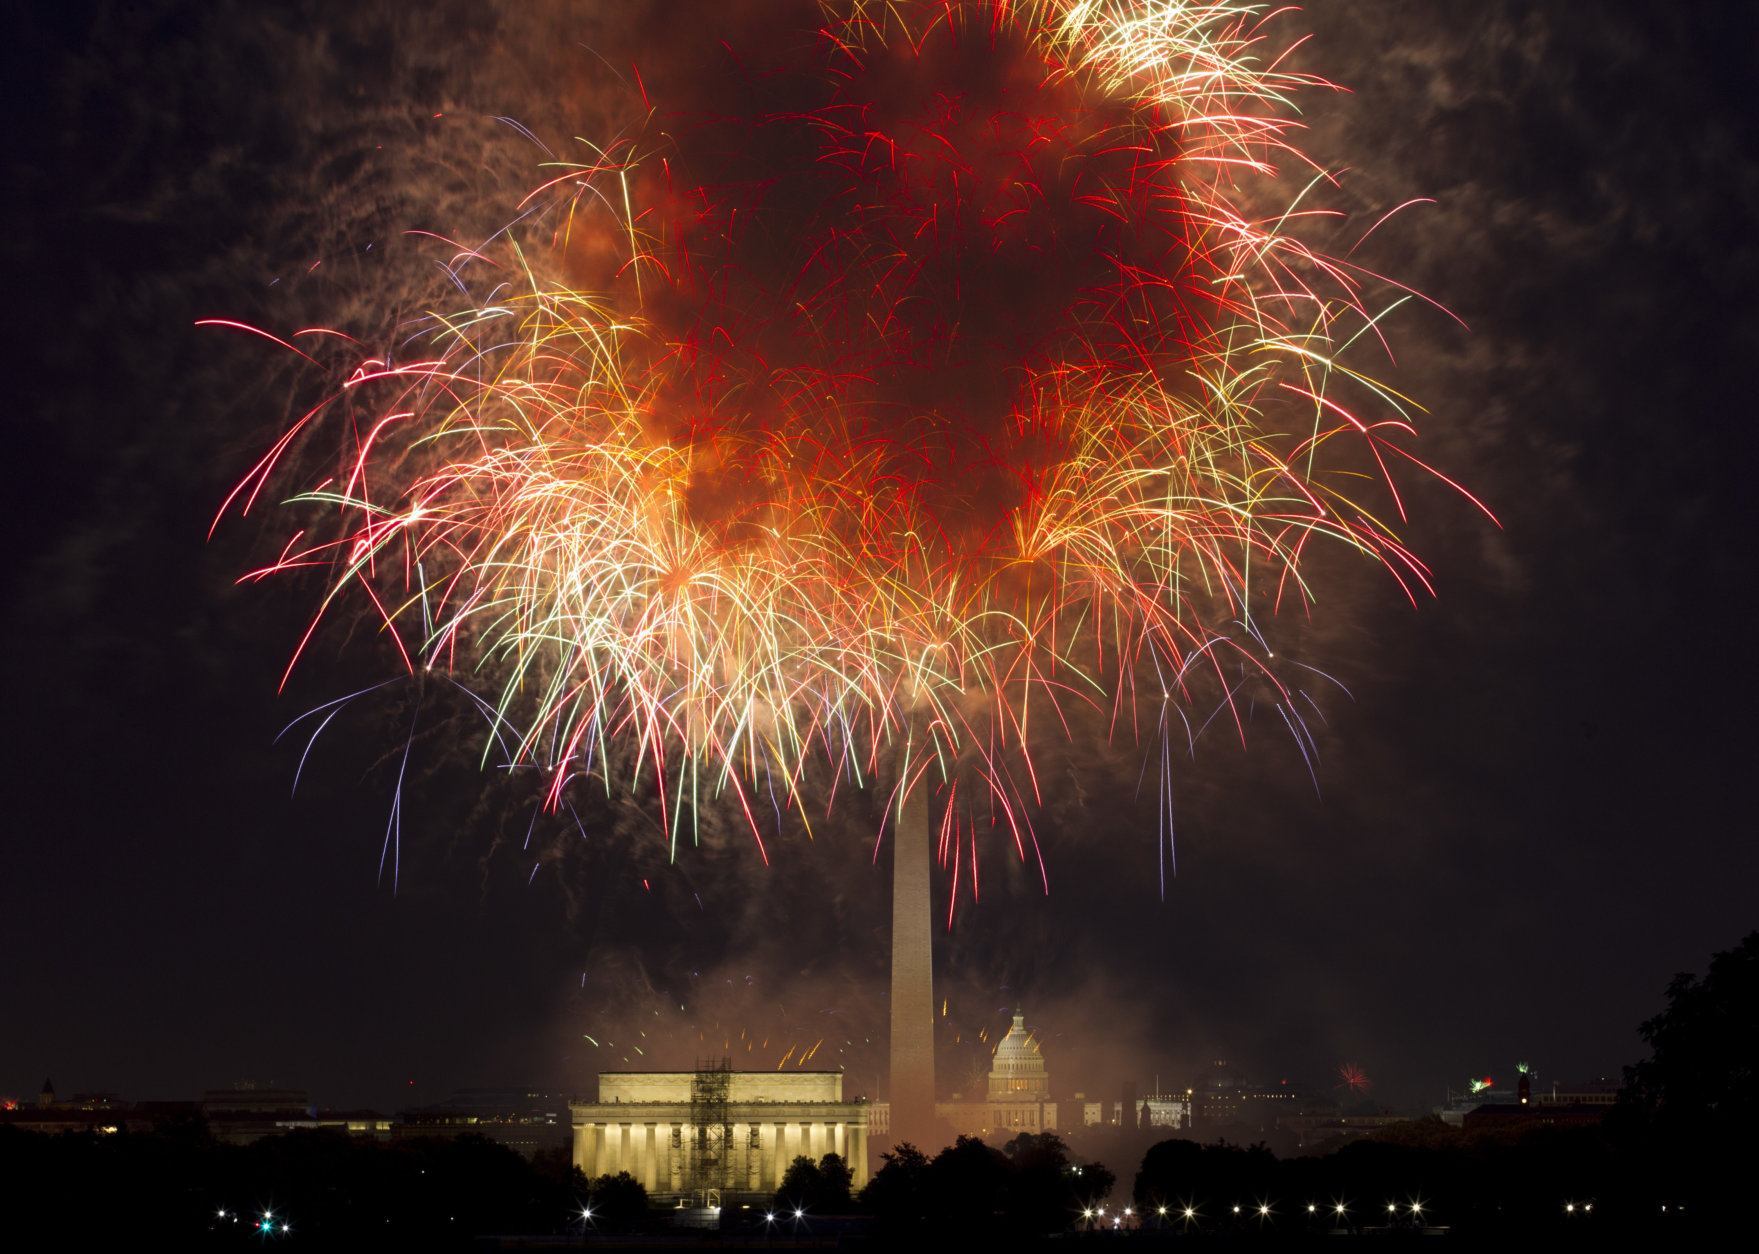 In this July 4, 2018, file photo, fireworks explode over Lincoln Memorial, Washington Monument and U.S. Capitol, along the National Mall in Washington, during the Fourth of July celebration. President Donald Trump has stated he wants to reshape the annual event into a “Salute to America” that would feature Trump himself speaking from the steps of the Lincoln Memorial. (AP Photo/Jose Luis Magana, File)